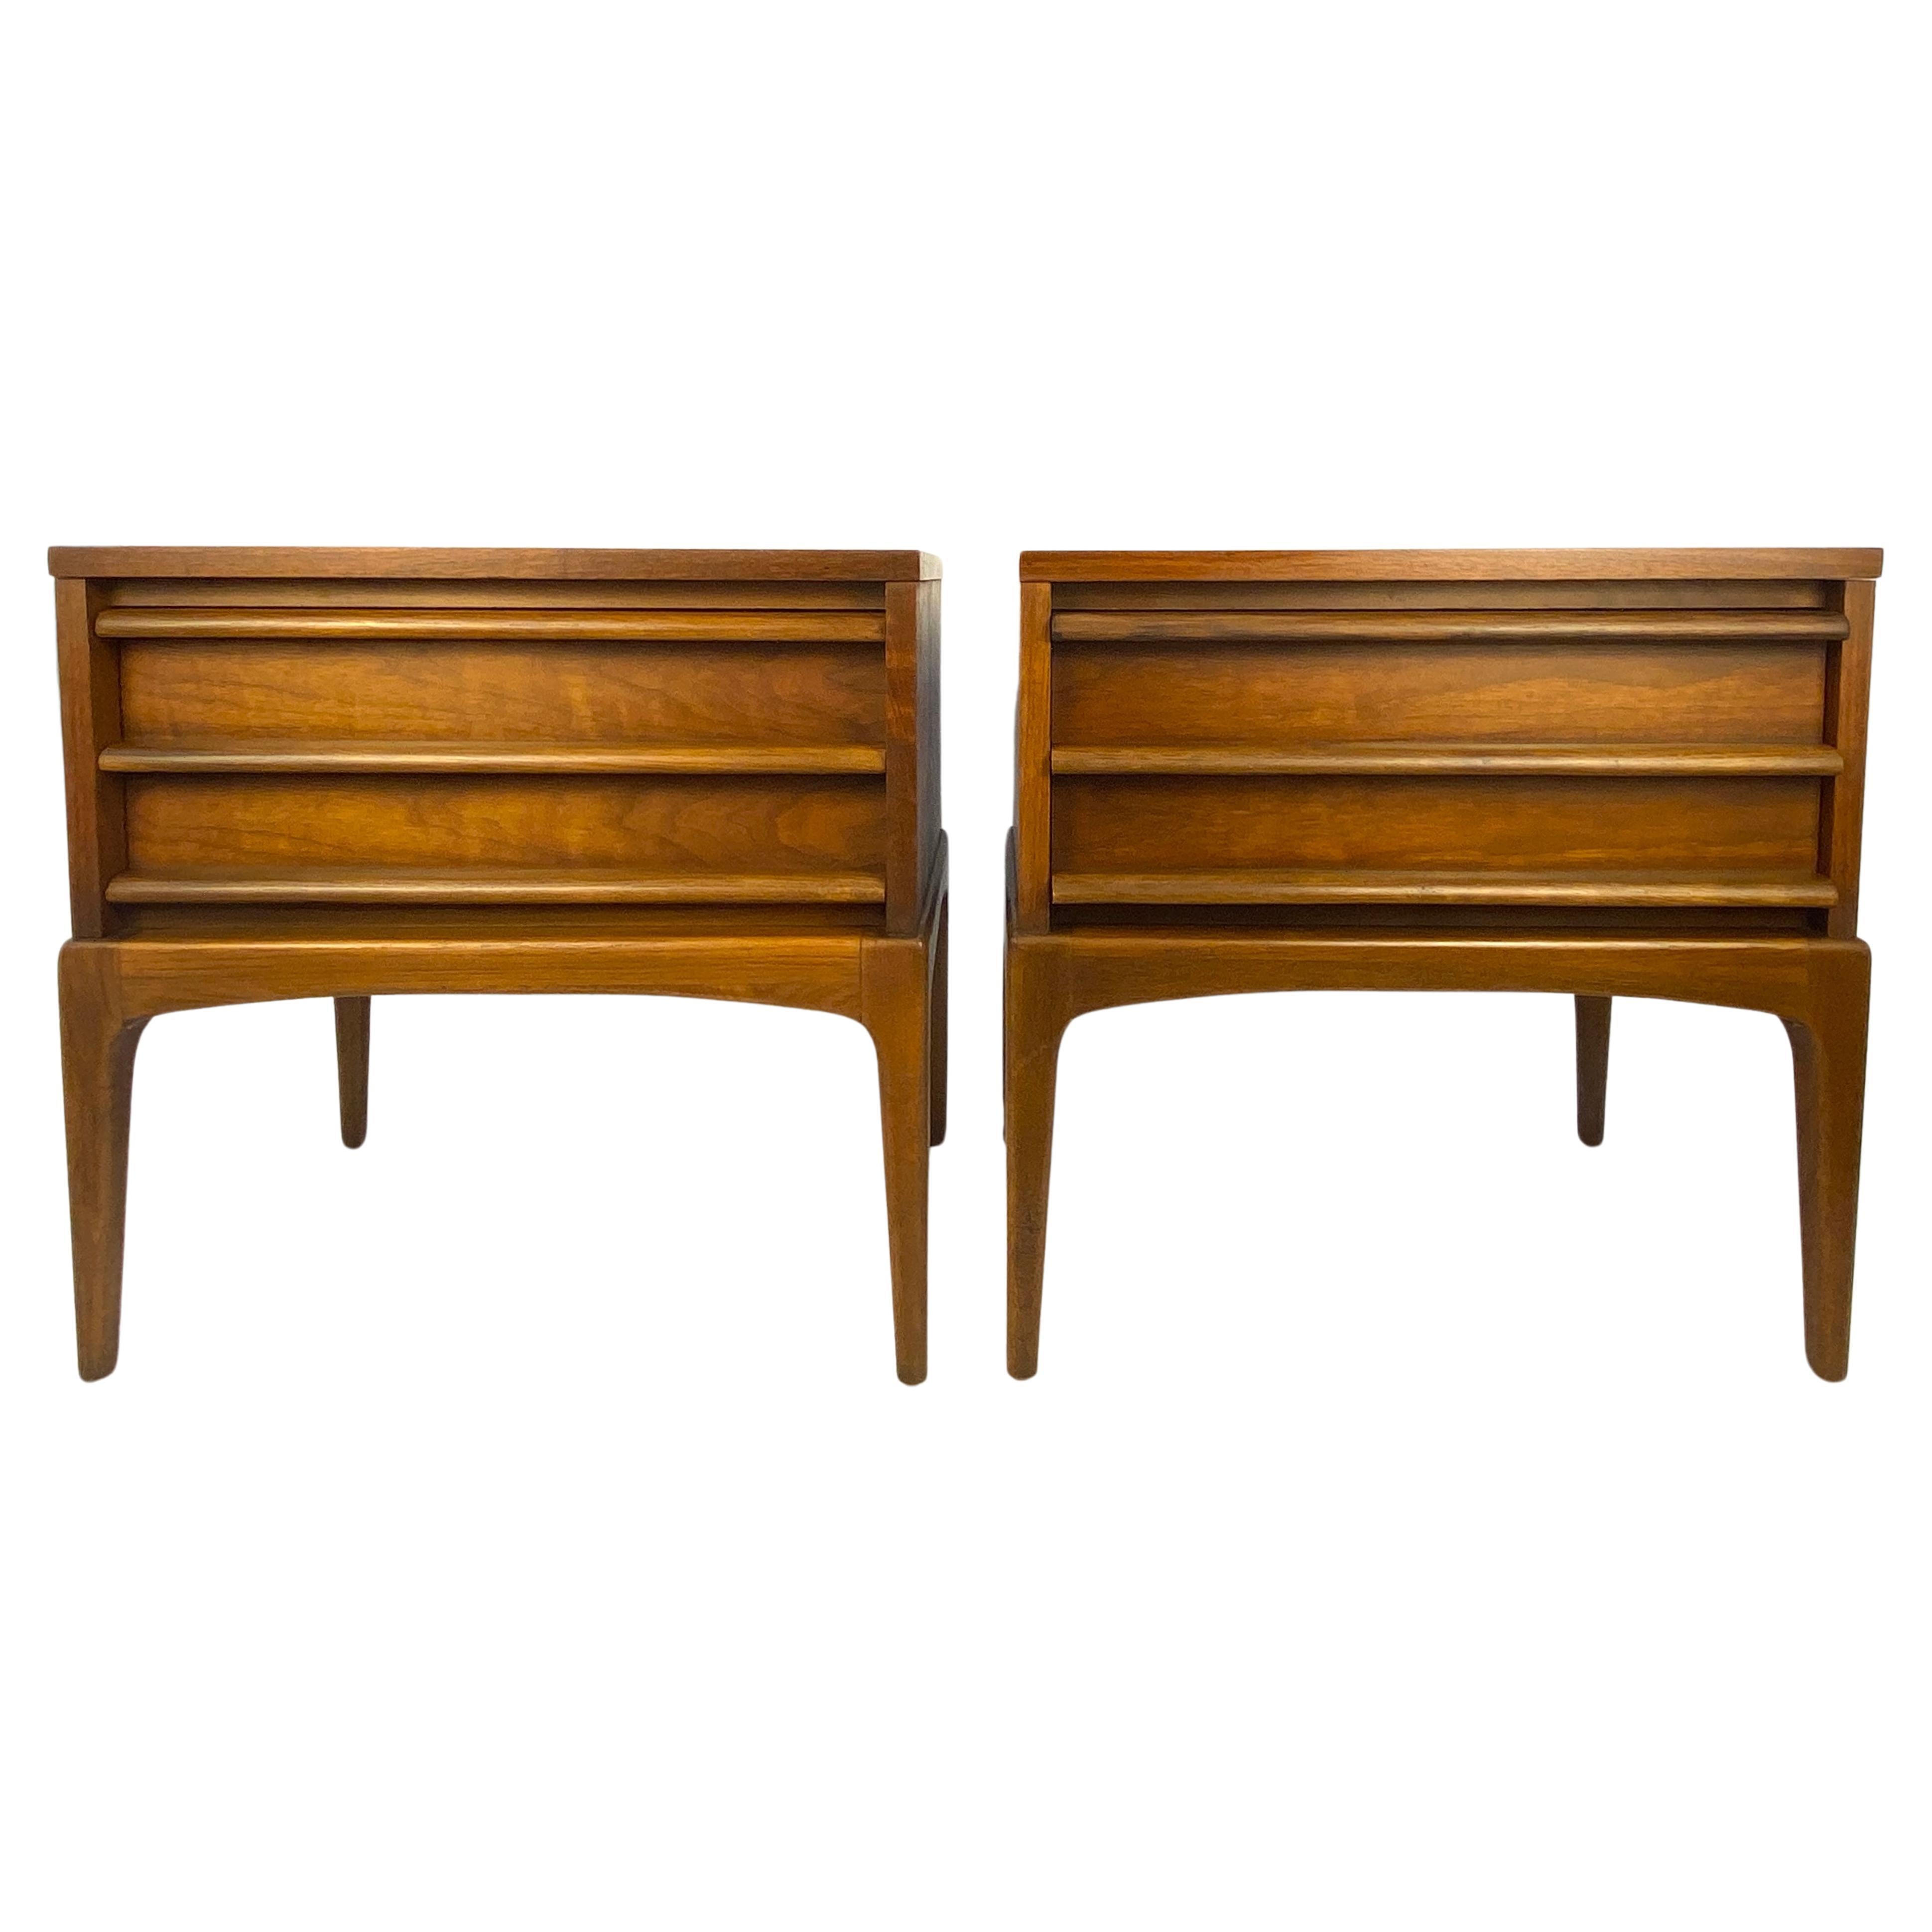 Pair of Mid Century Nightstands Paul McCobb Style Bedside Tables, Refinished For Sale